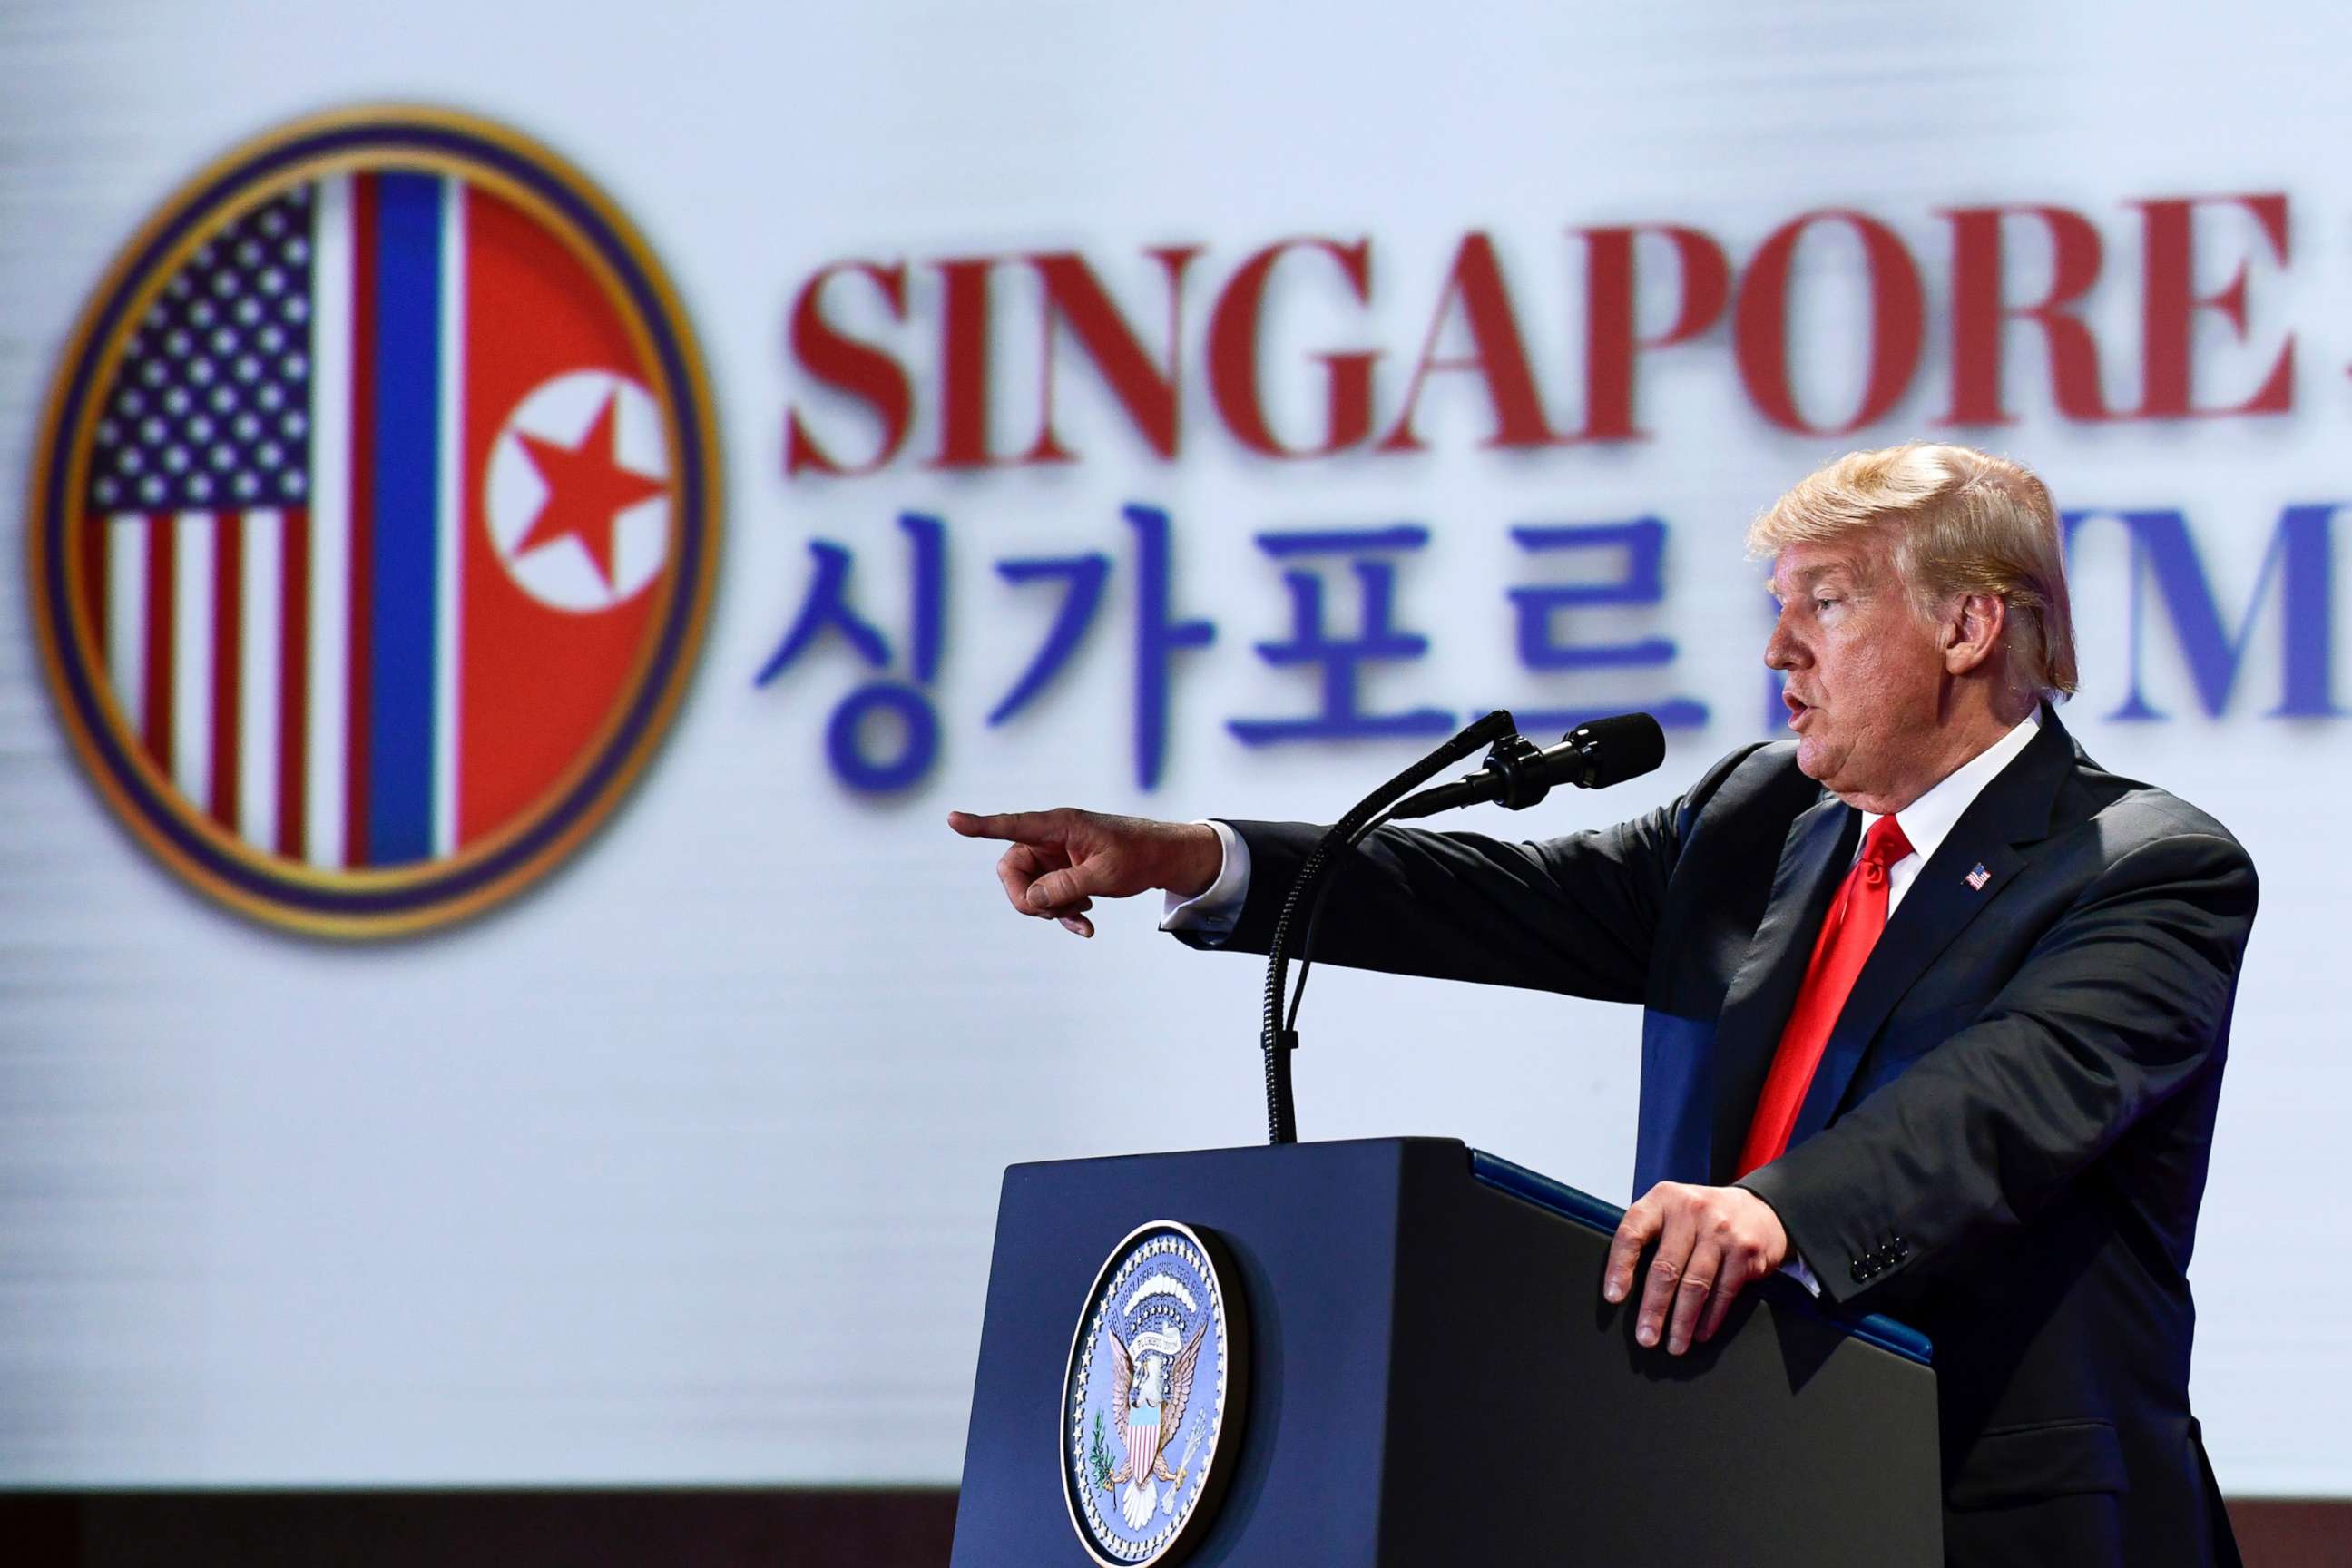 PHOTO: President Donald Trump answers questions about the summit with North Korea leader Kim Jong Un during a press conference at the Capella resort on Sentosa Island, June 12, 2018 in Singapore.